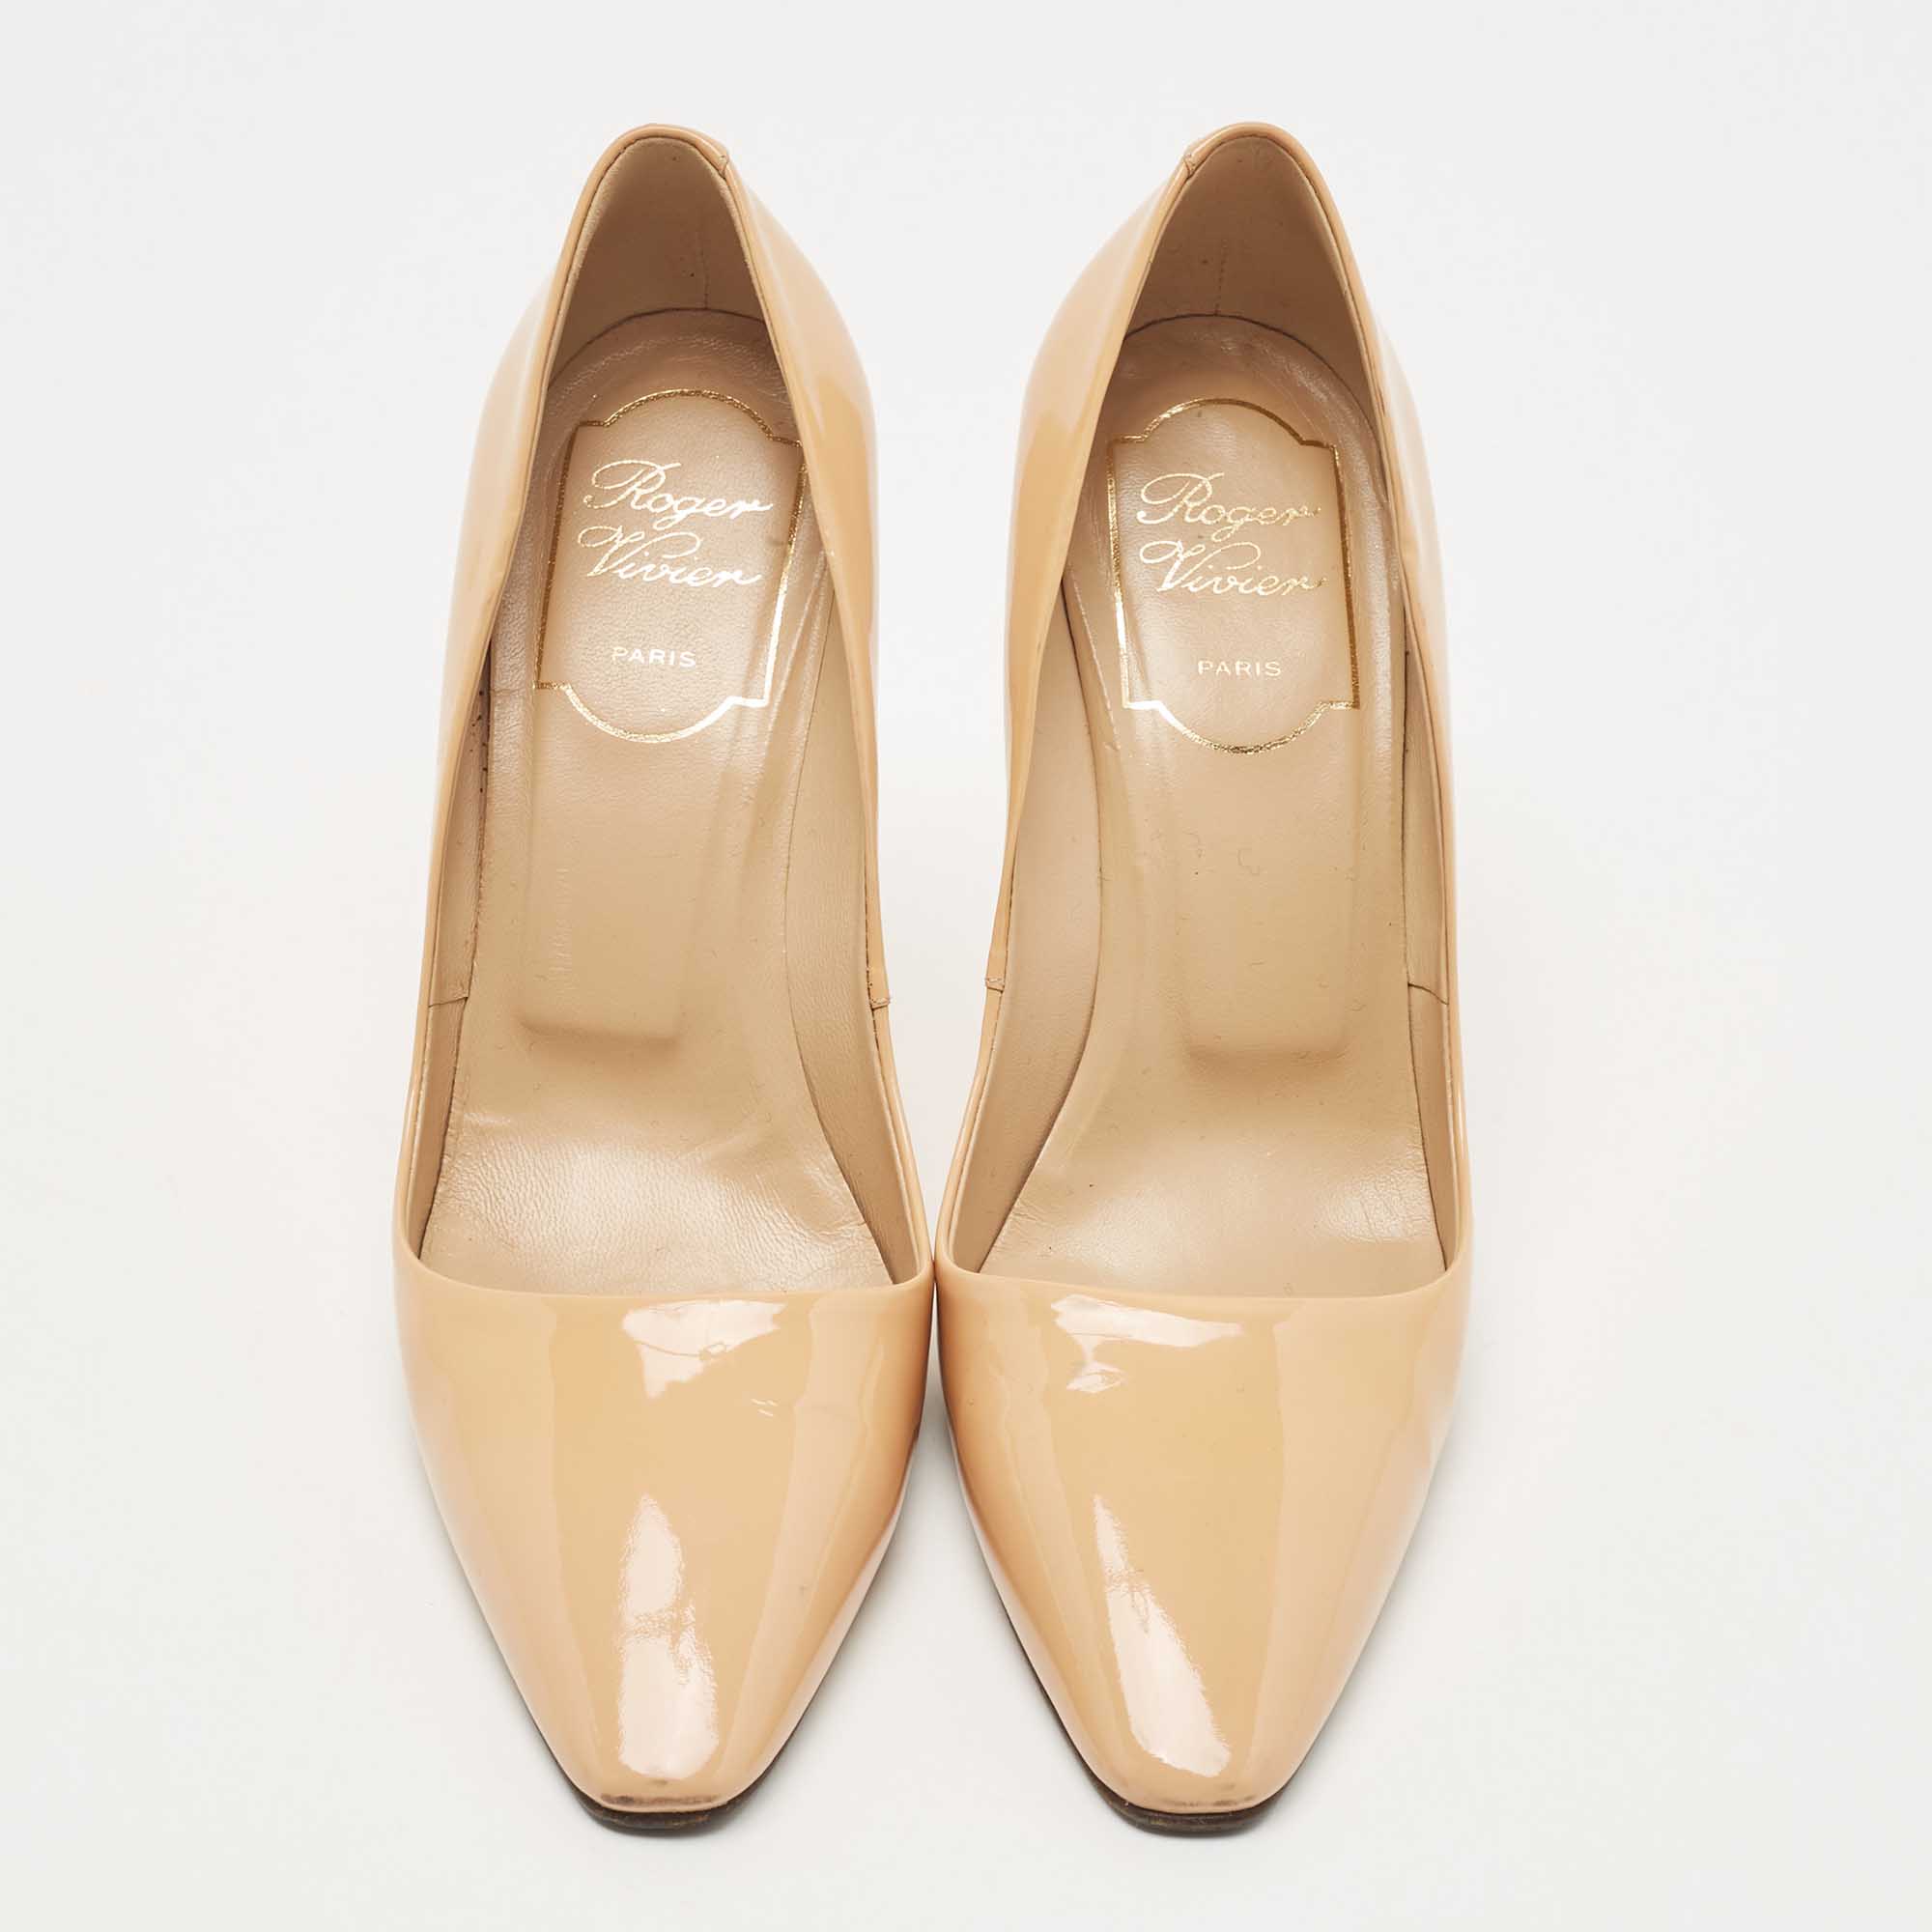 Roger Vivier Beige Patent Leather Pointed Toe Pumps Size 35